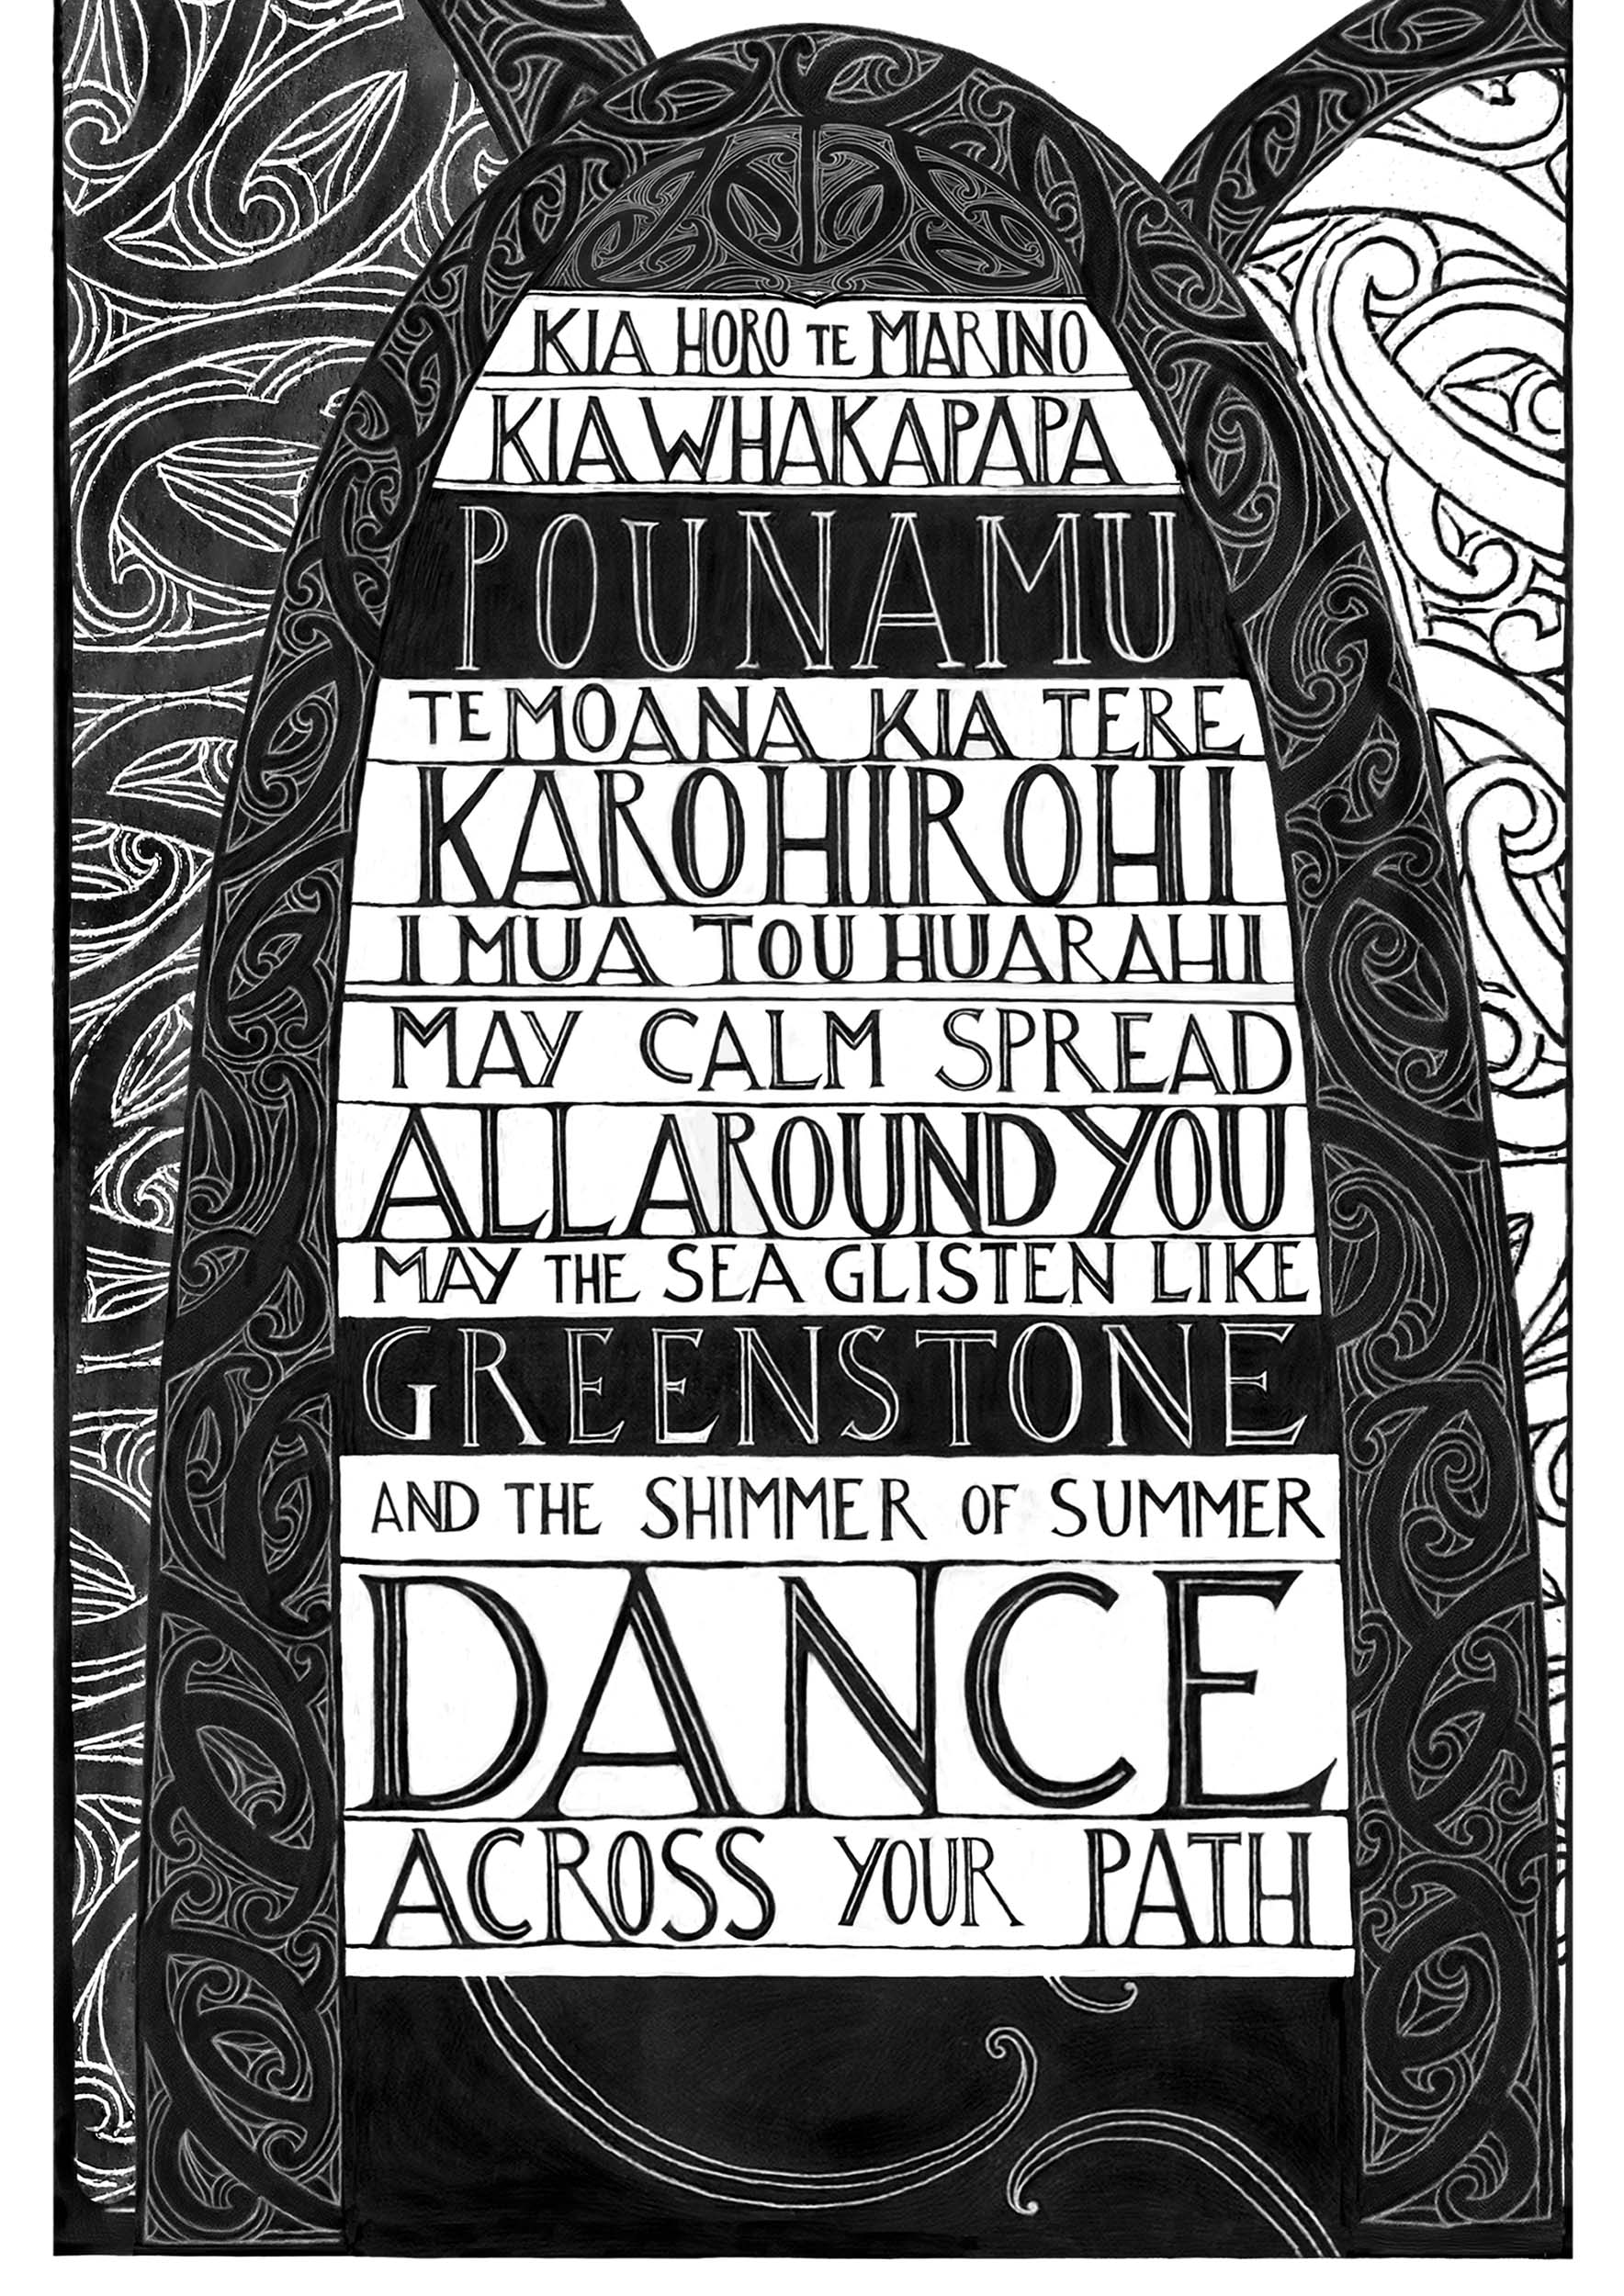 close up of the words in Kia horo te marino blessing art print with maori art and words in te reo maori and english by Nz artist Amber Smith